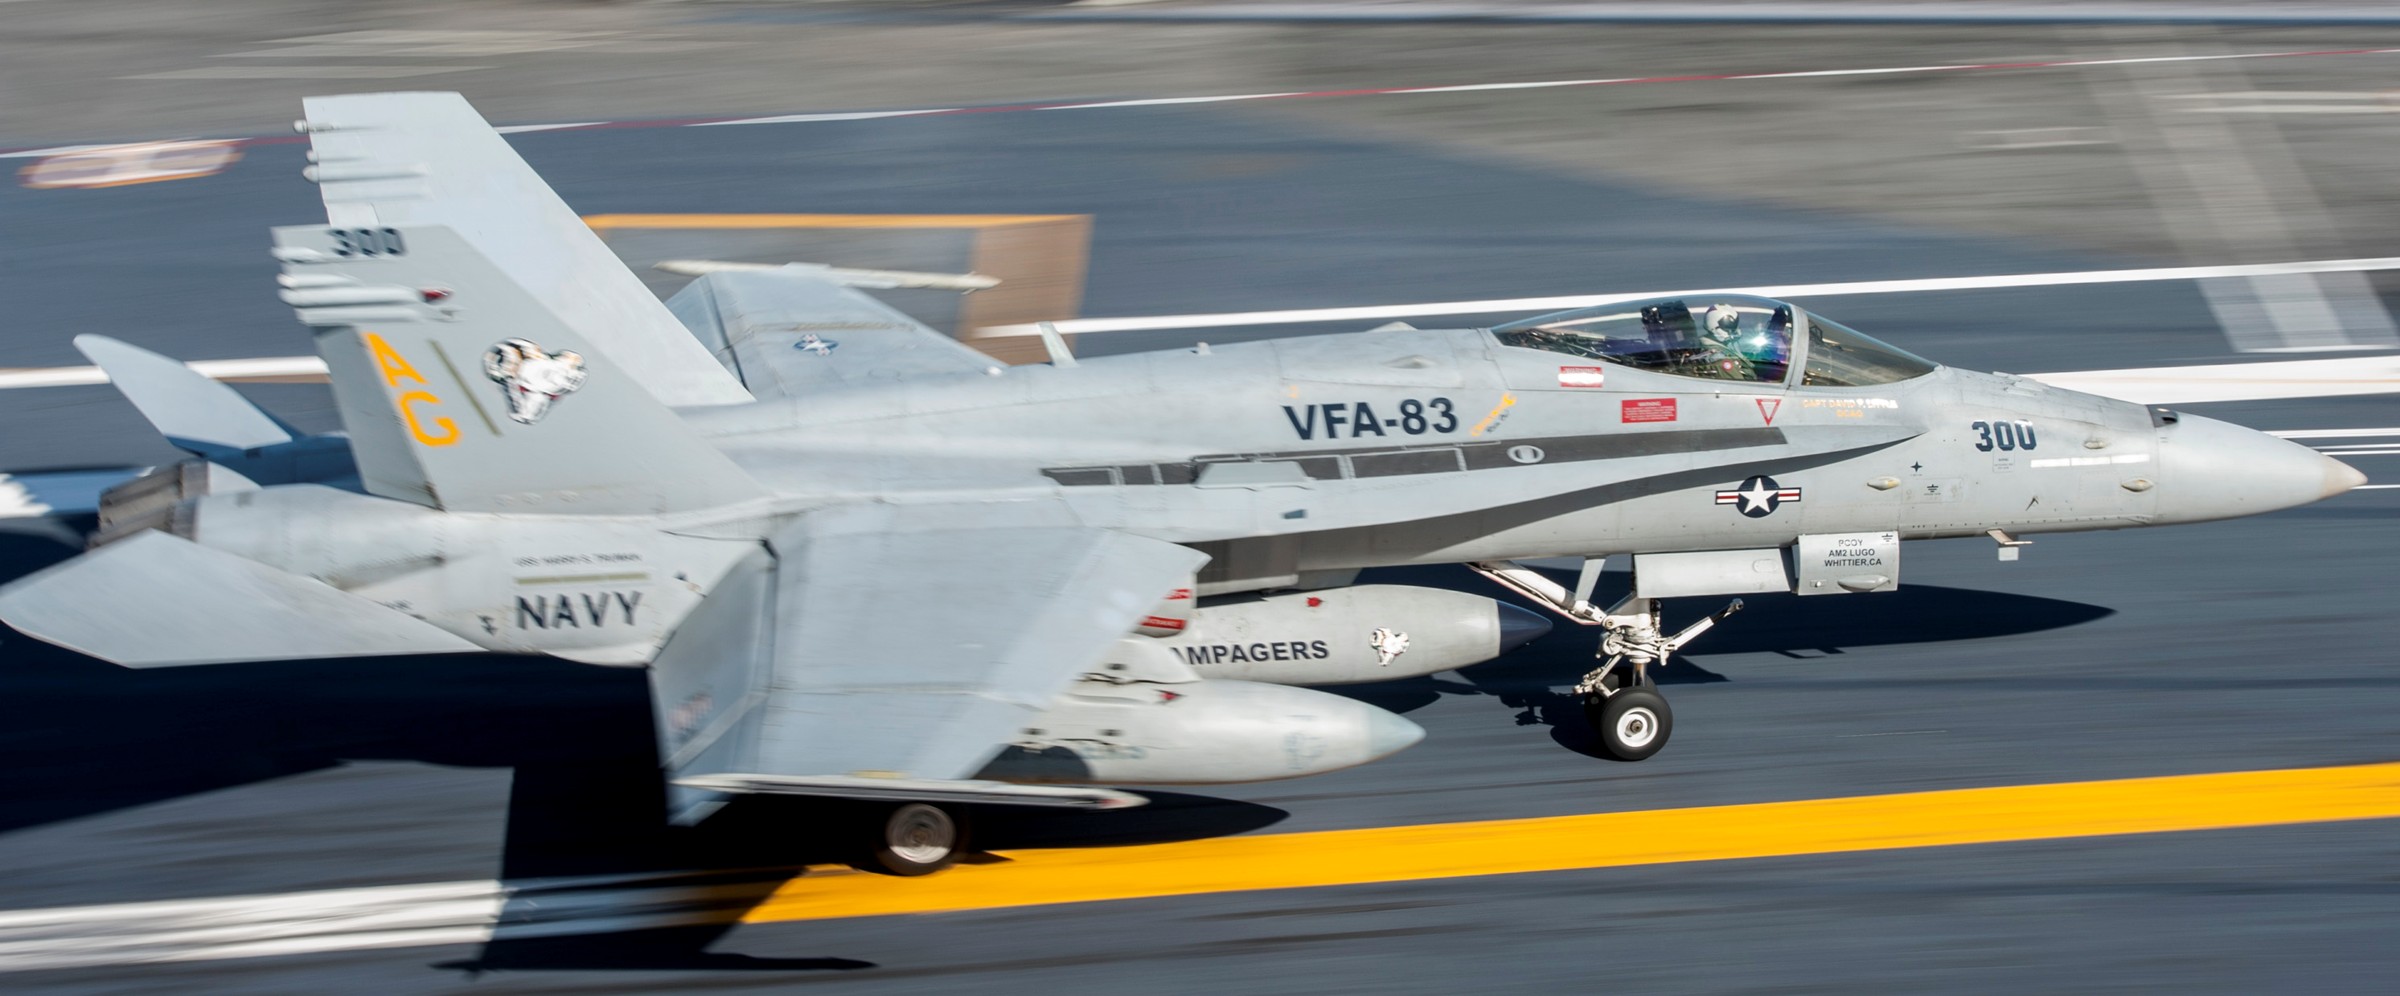 vfa-83 rampagers strike fighter squadron f/a-18c hornet cvw-7 uss harry s. truman cvn-75 65p